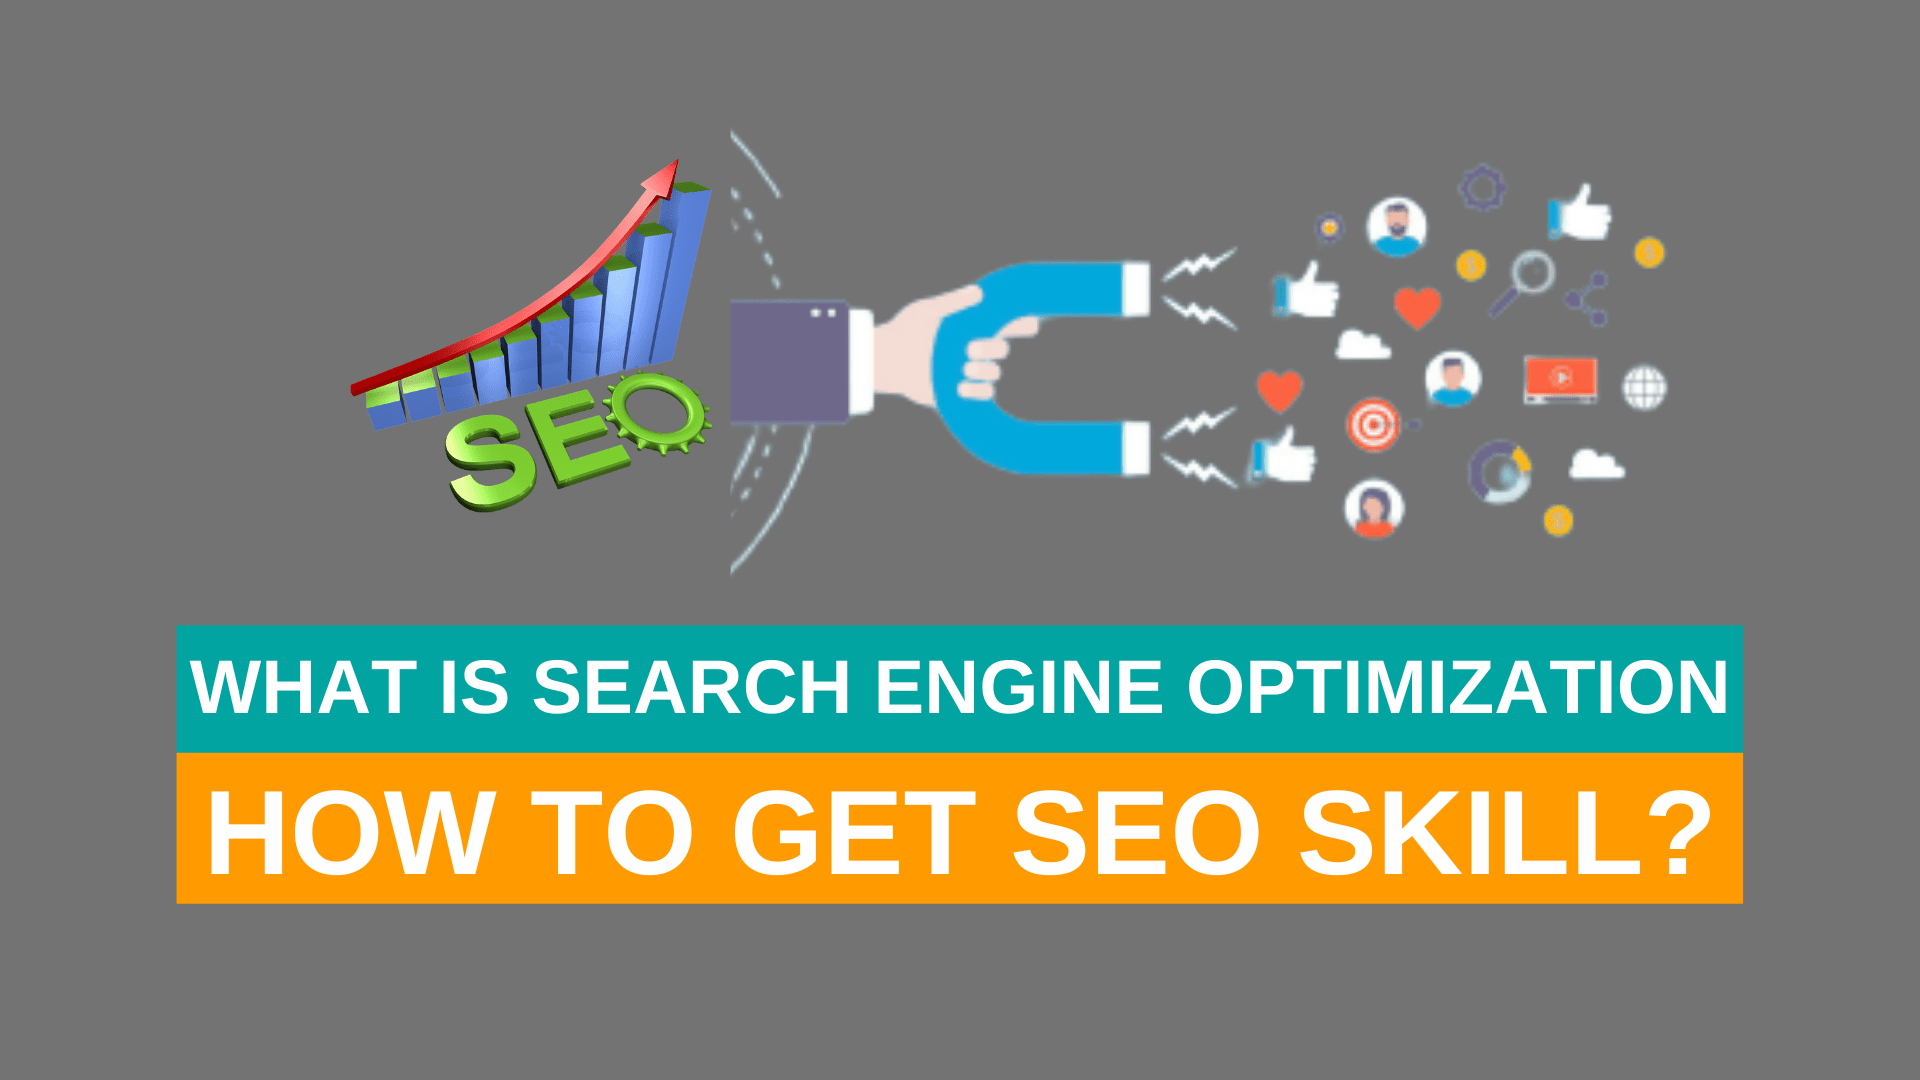 What is Search Engine Optimization and How to Get SEO Skill